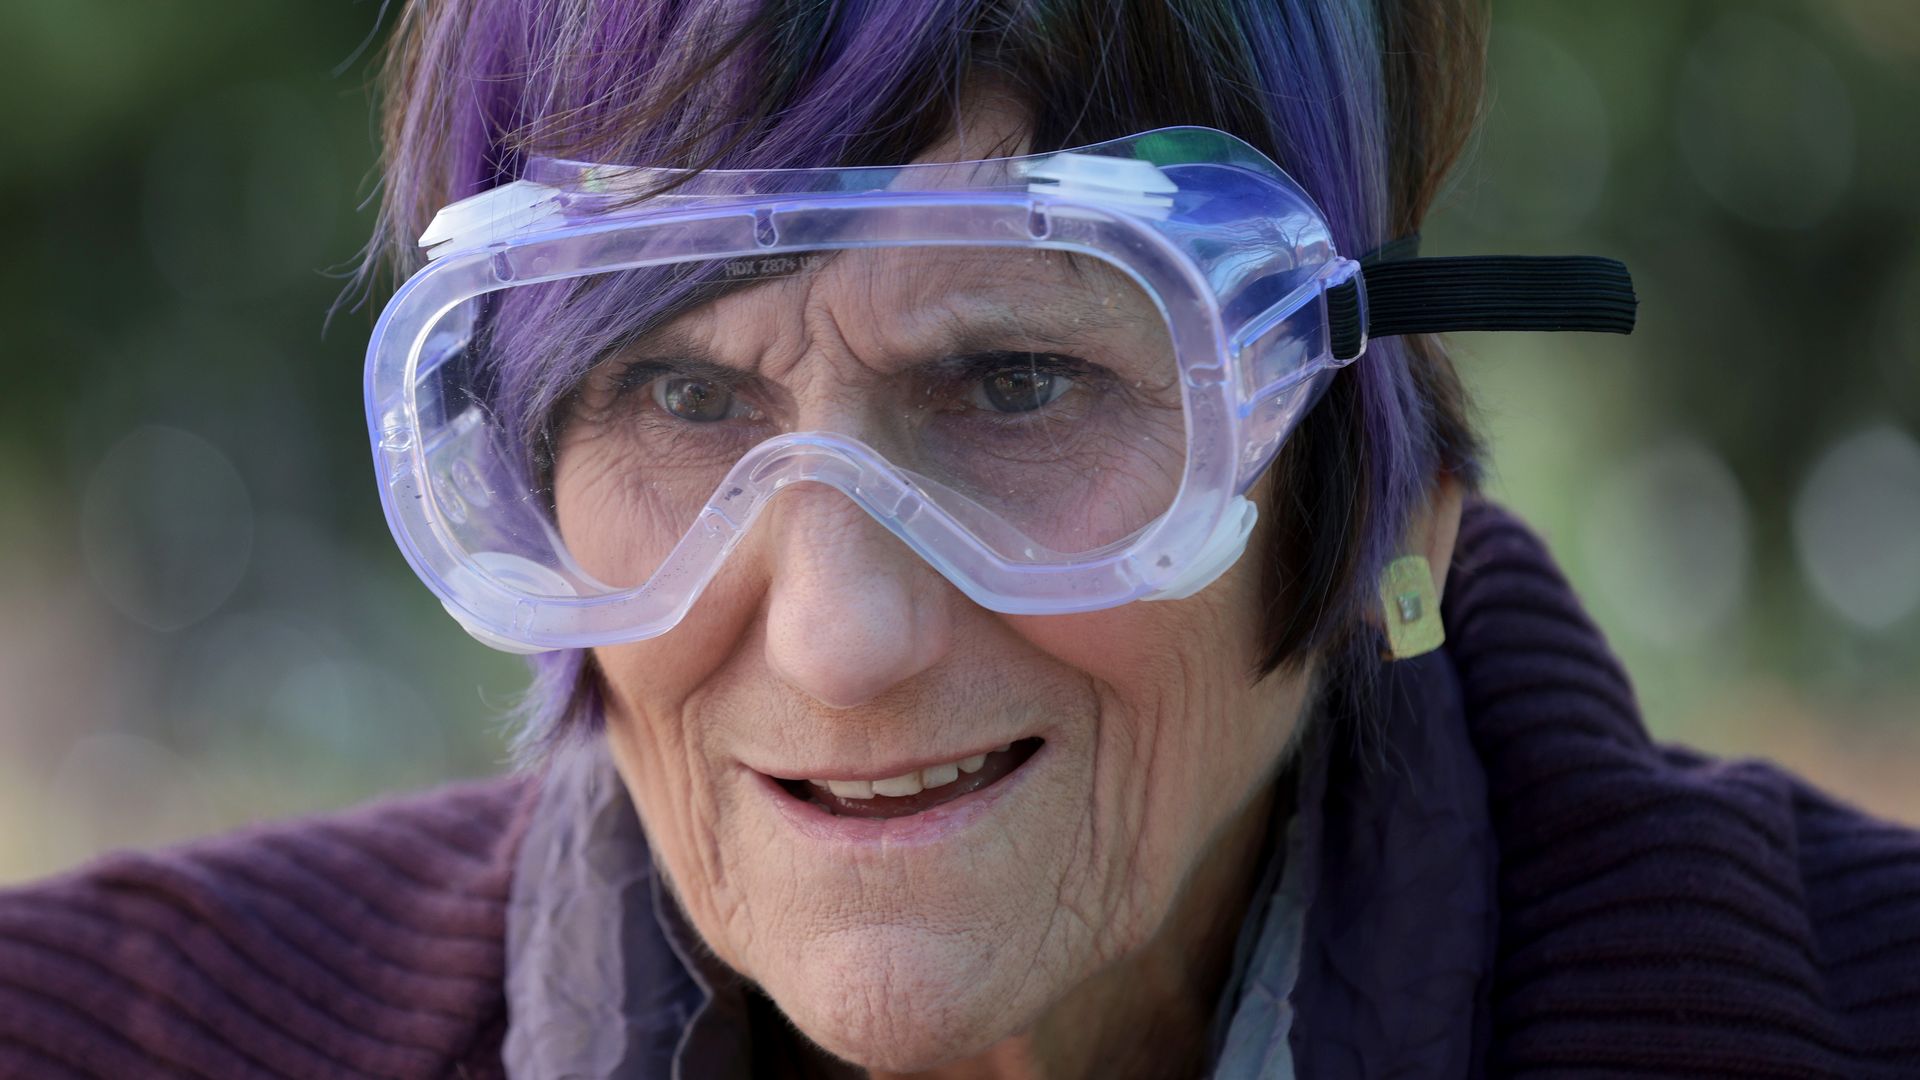 Rep. Rosa DeLauro is seen wearing goggles at an event to turn guns into garden implements.